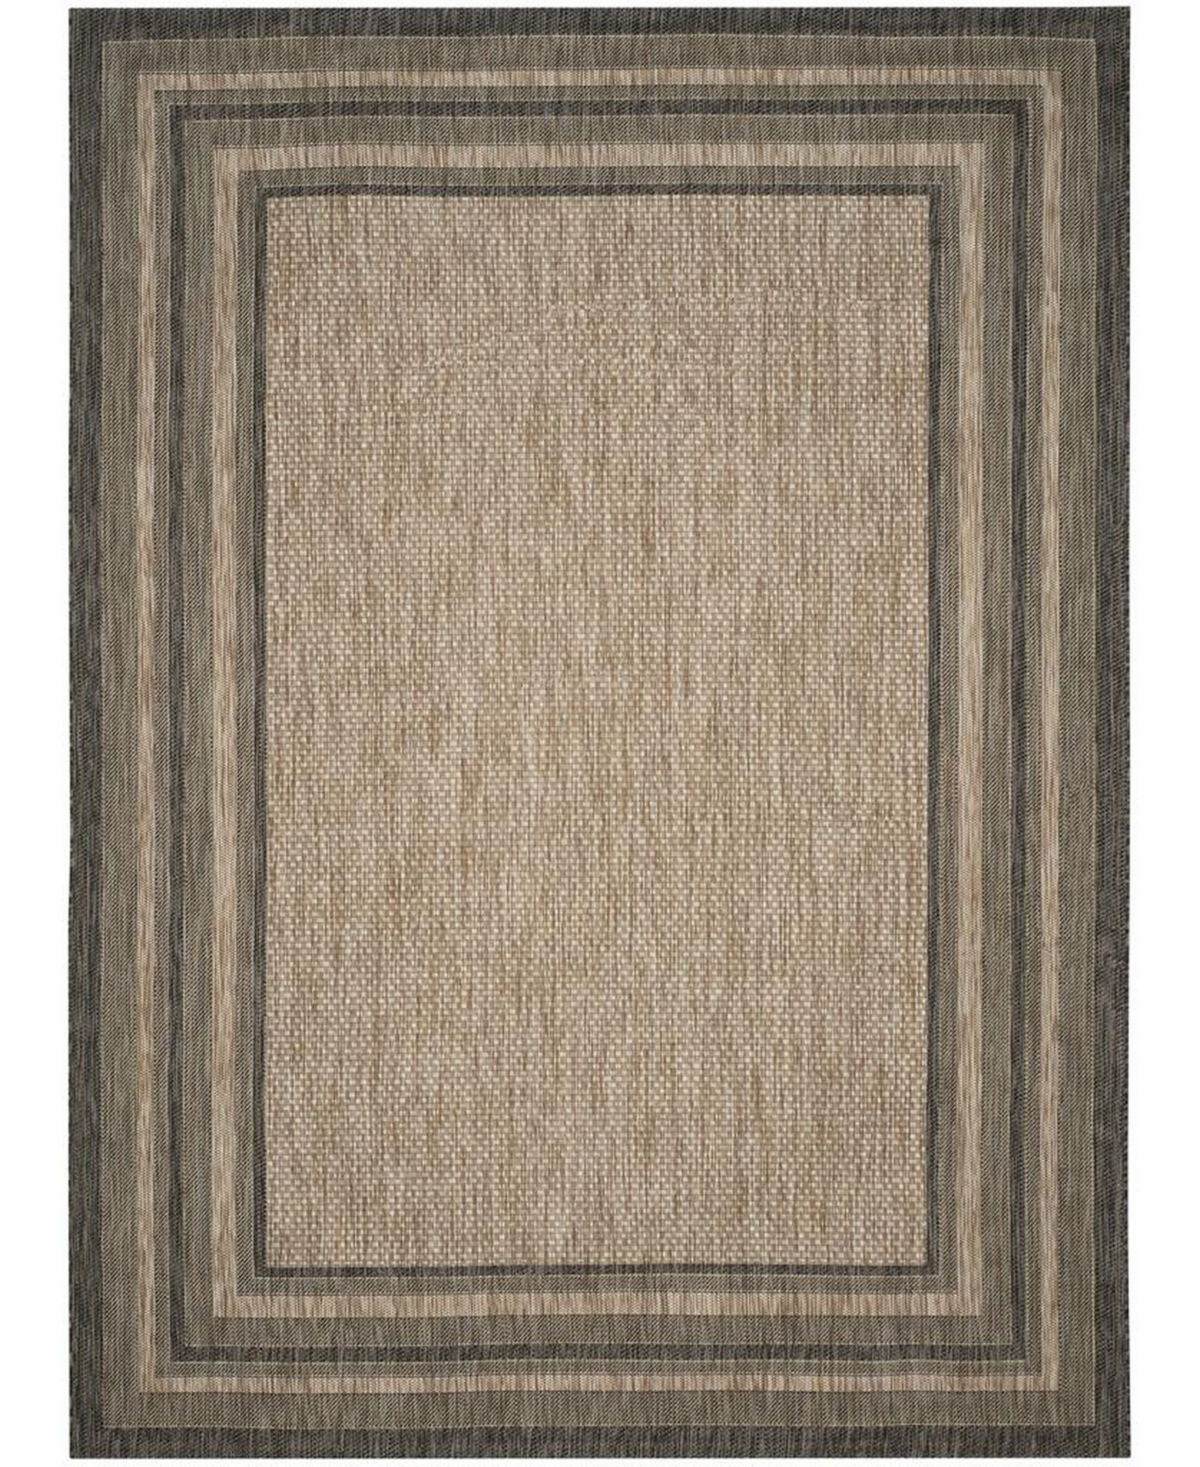 Safavieh Courtyard Cy8475 Natural And Black 9' X 12' Outdoor Area Rug In Metallic